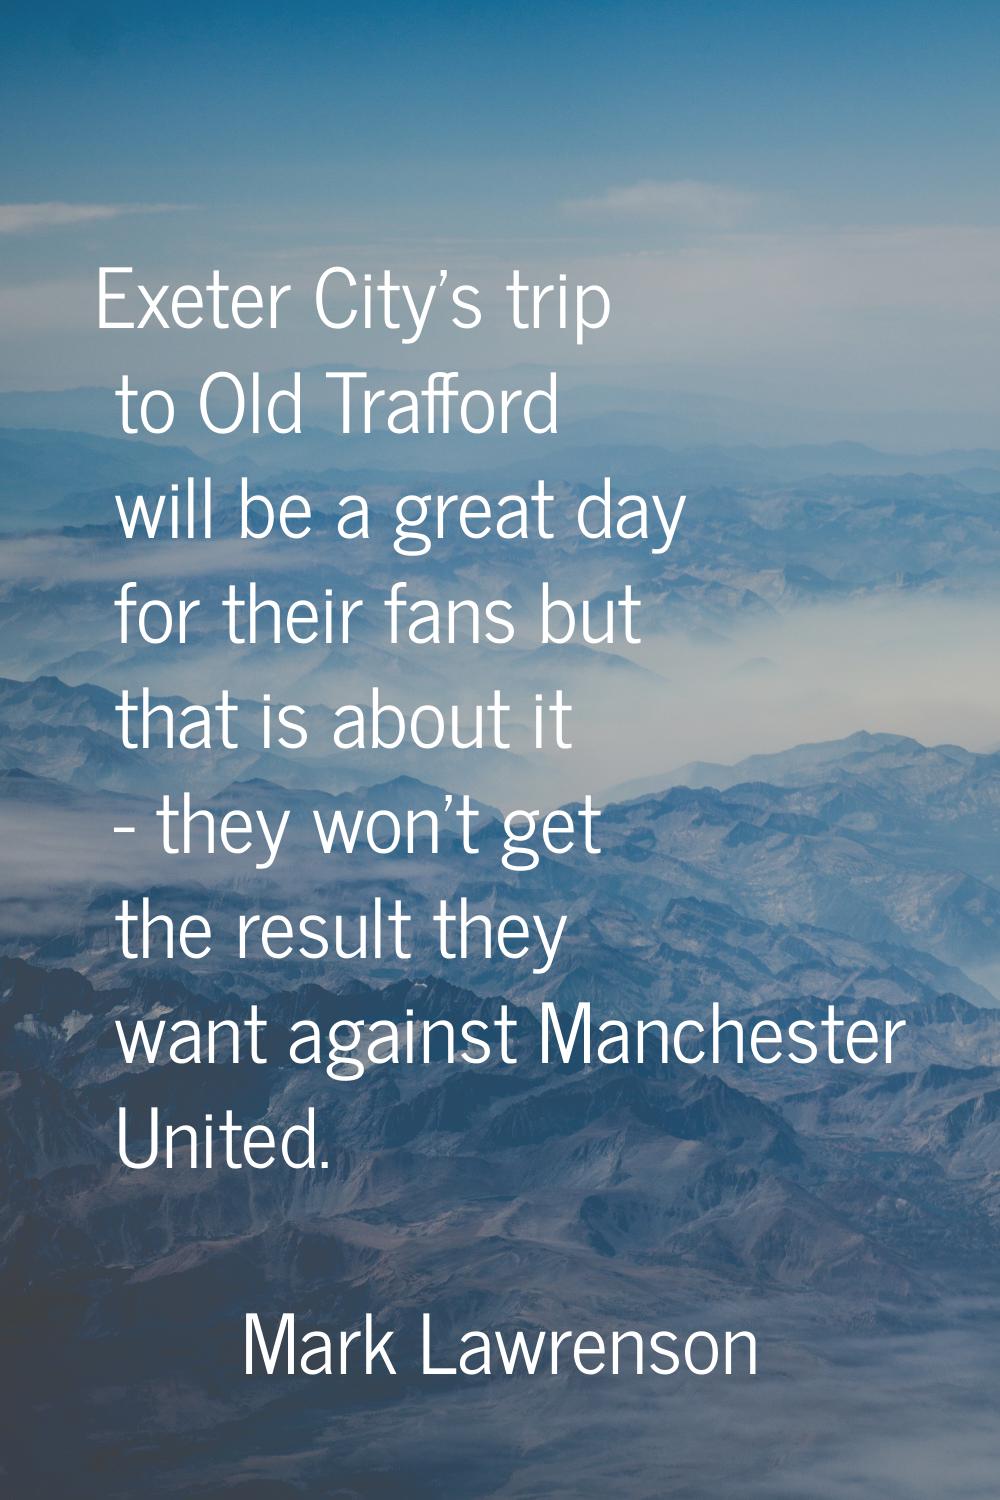 Exeter City's trip to Old Trafford will be a great day for their fans but that is about it - they w